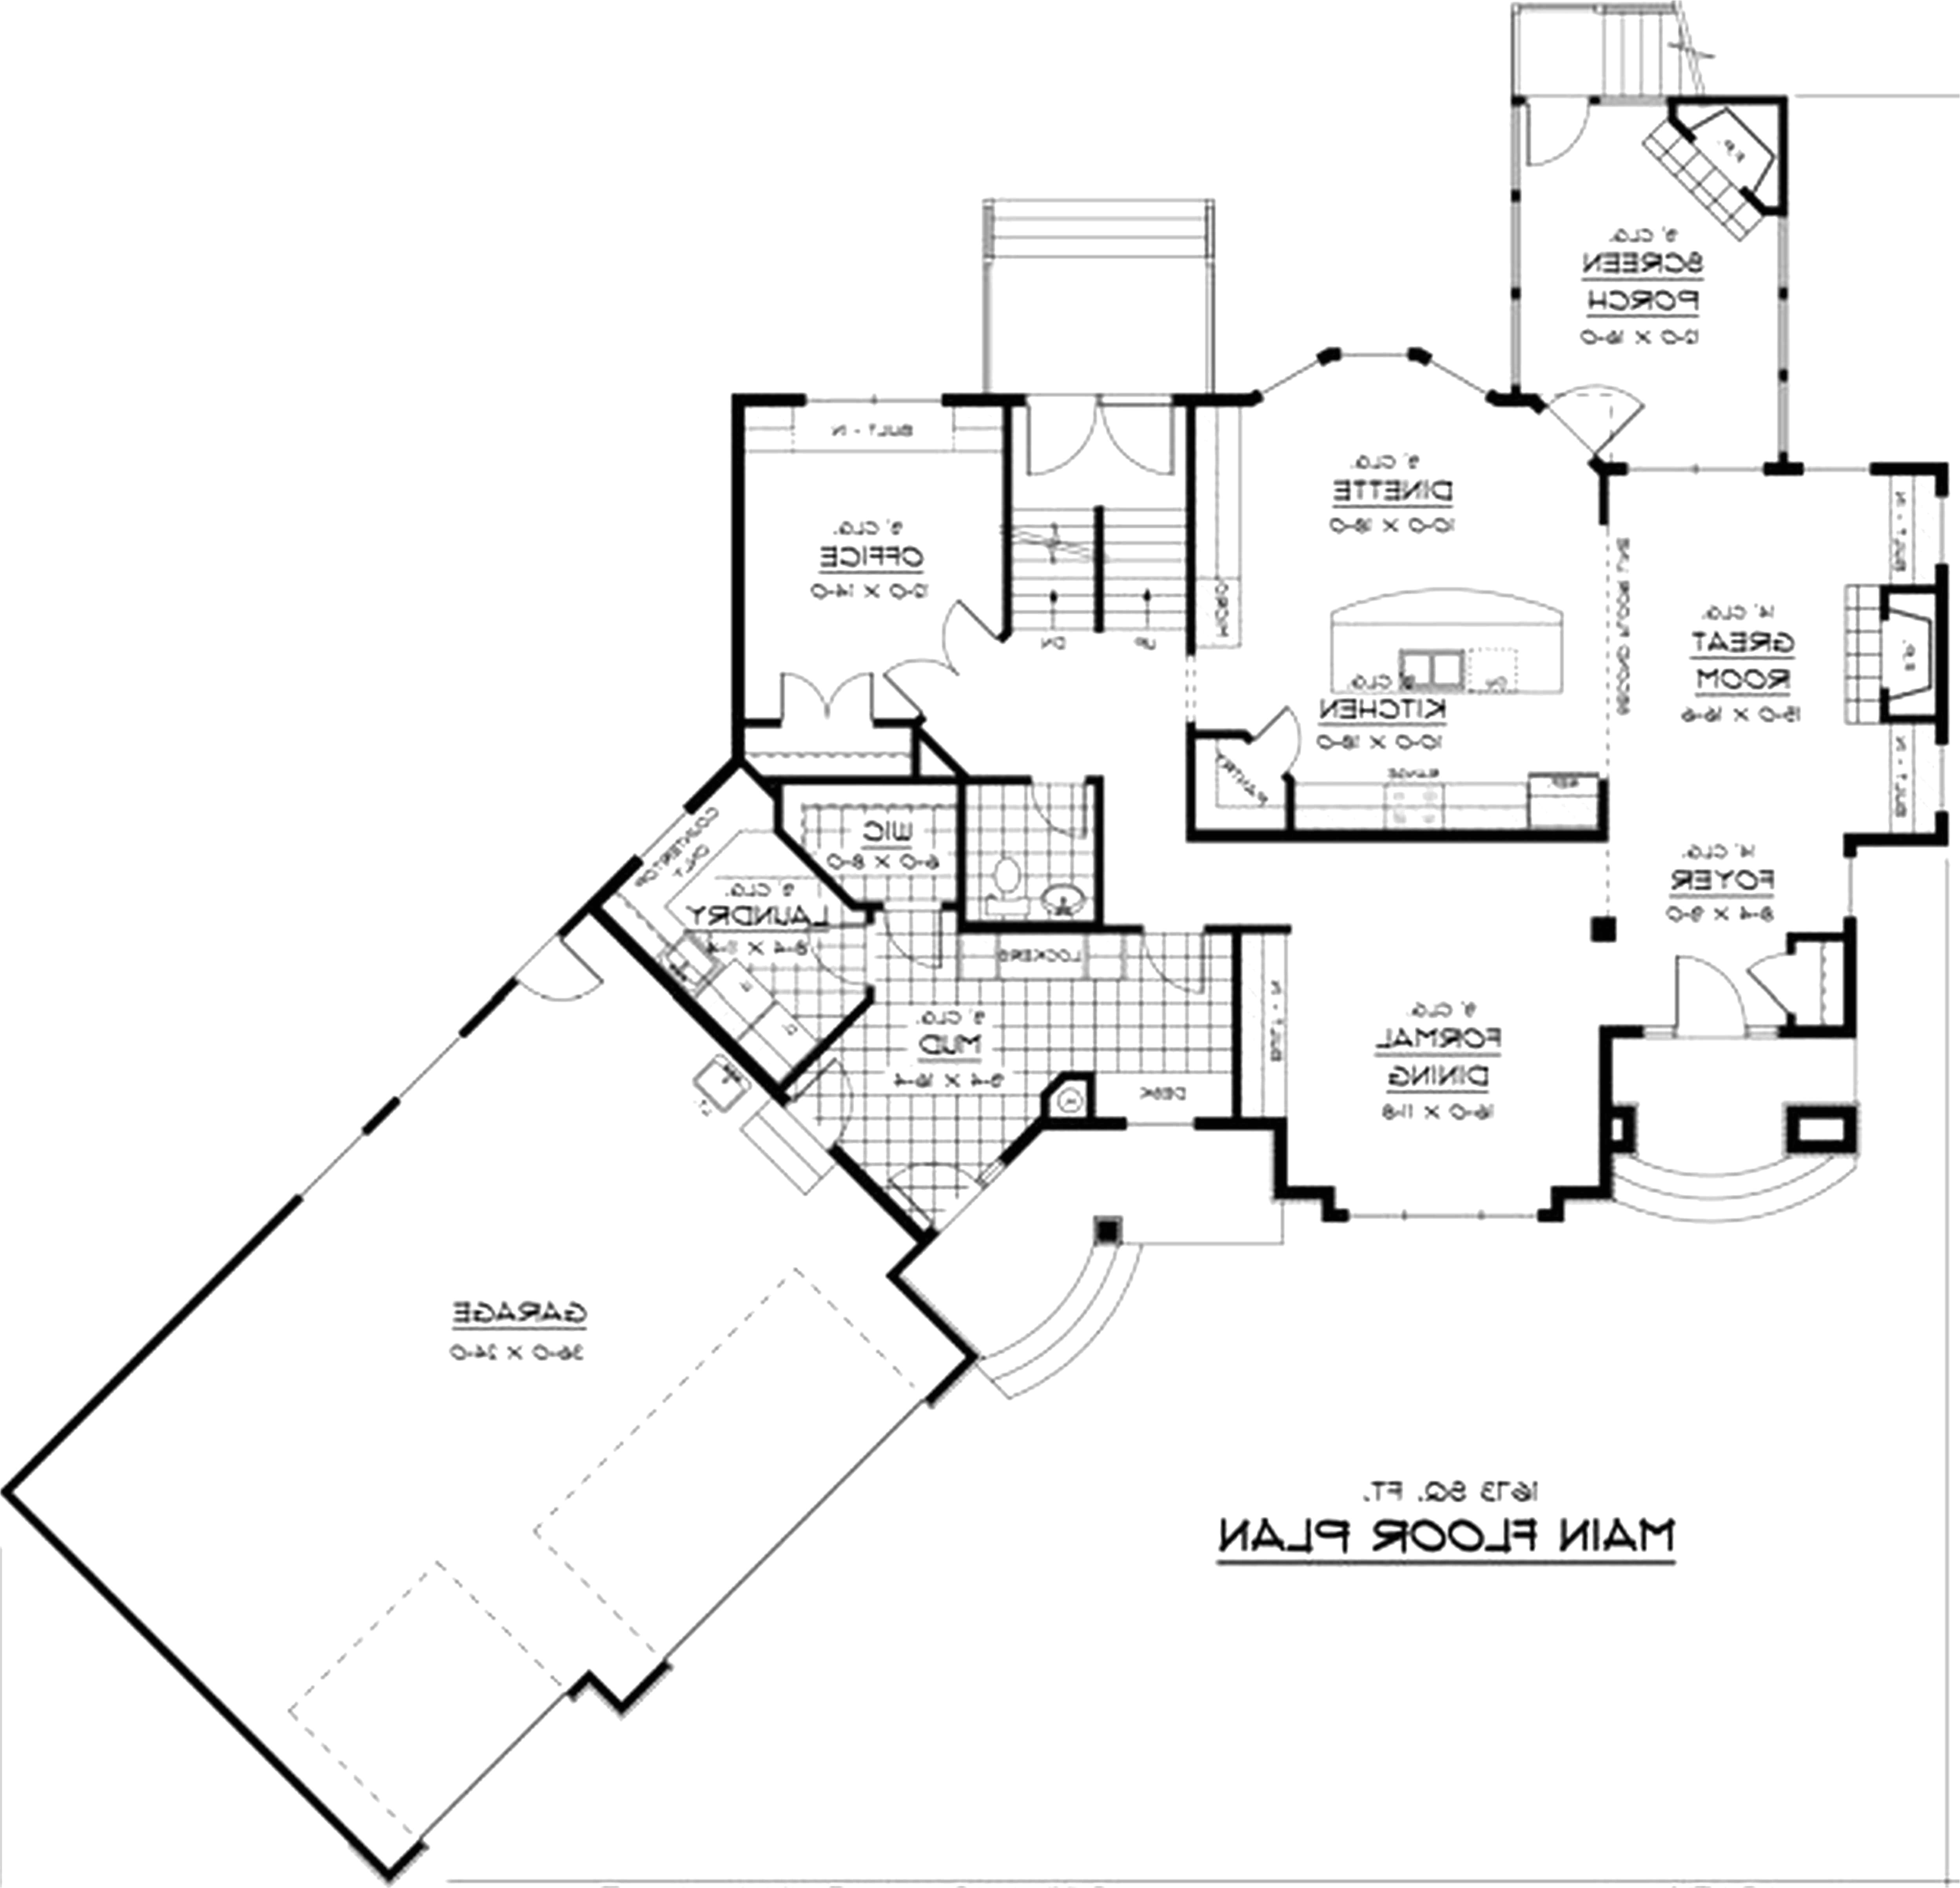 luxury ranch house plans with indoor pool or luxury small house plans home floor with indoor pool ranch walkout